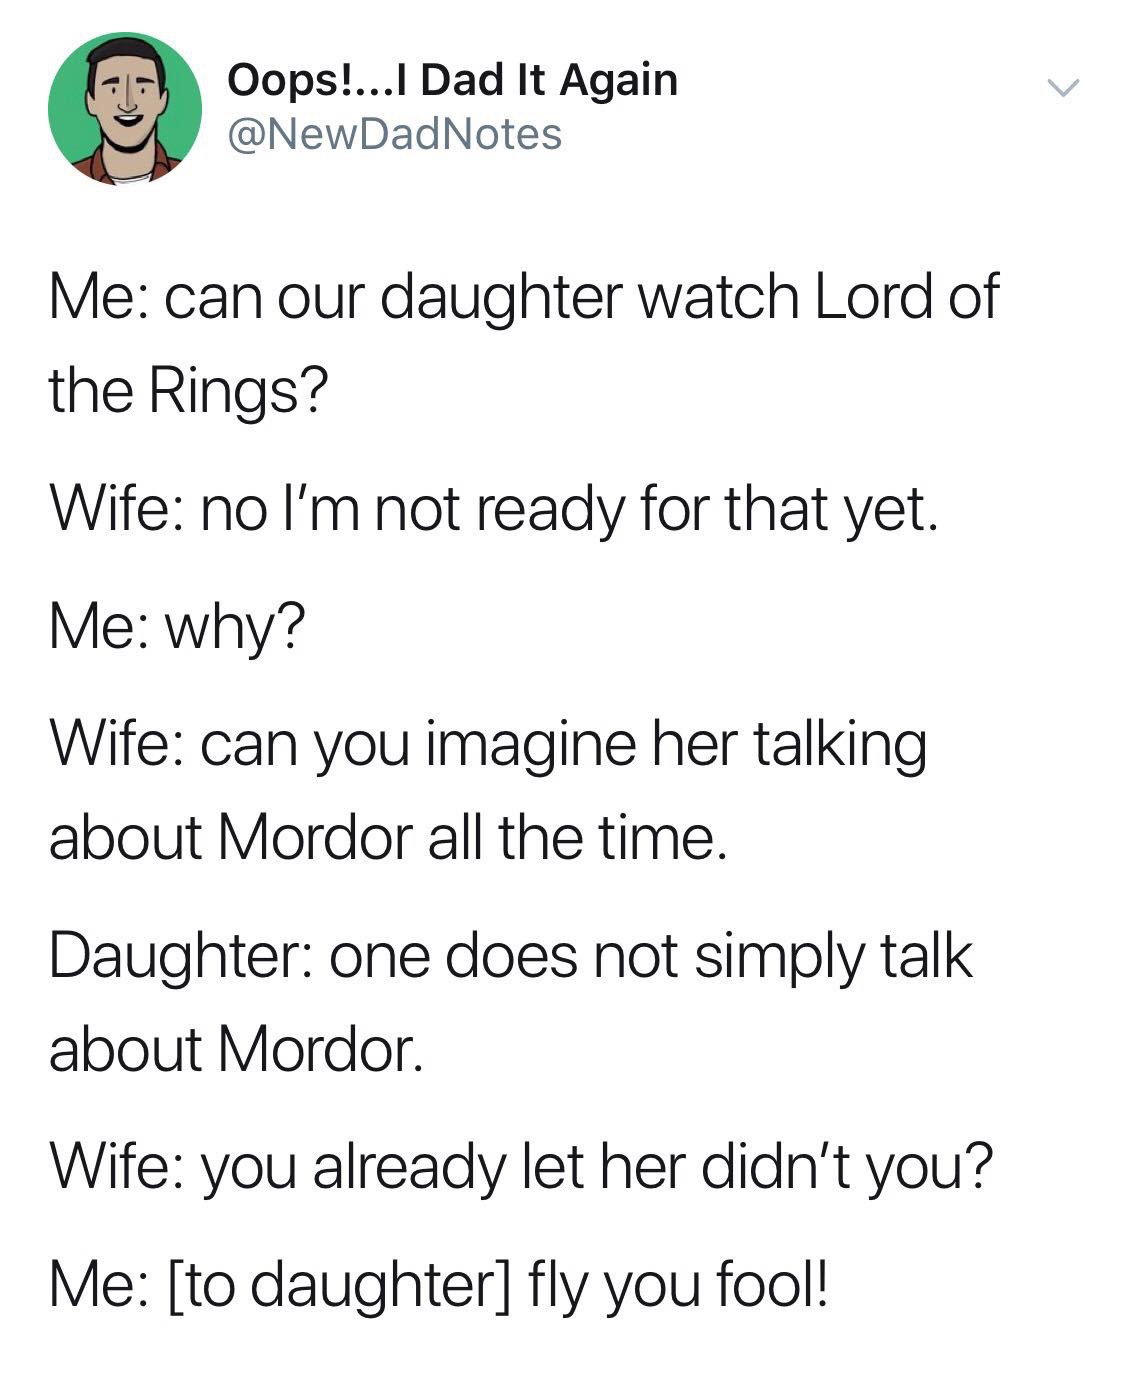 my neck my back clean up song meme - Oops!...I Dad It Again Me can our daughter watch Lord of the Rings? Wife no I'm not ready for that yet. Me why? Wife can you imagine her talking about Mordor all the time. Daughter one does not simply talk about Mordor